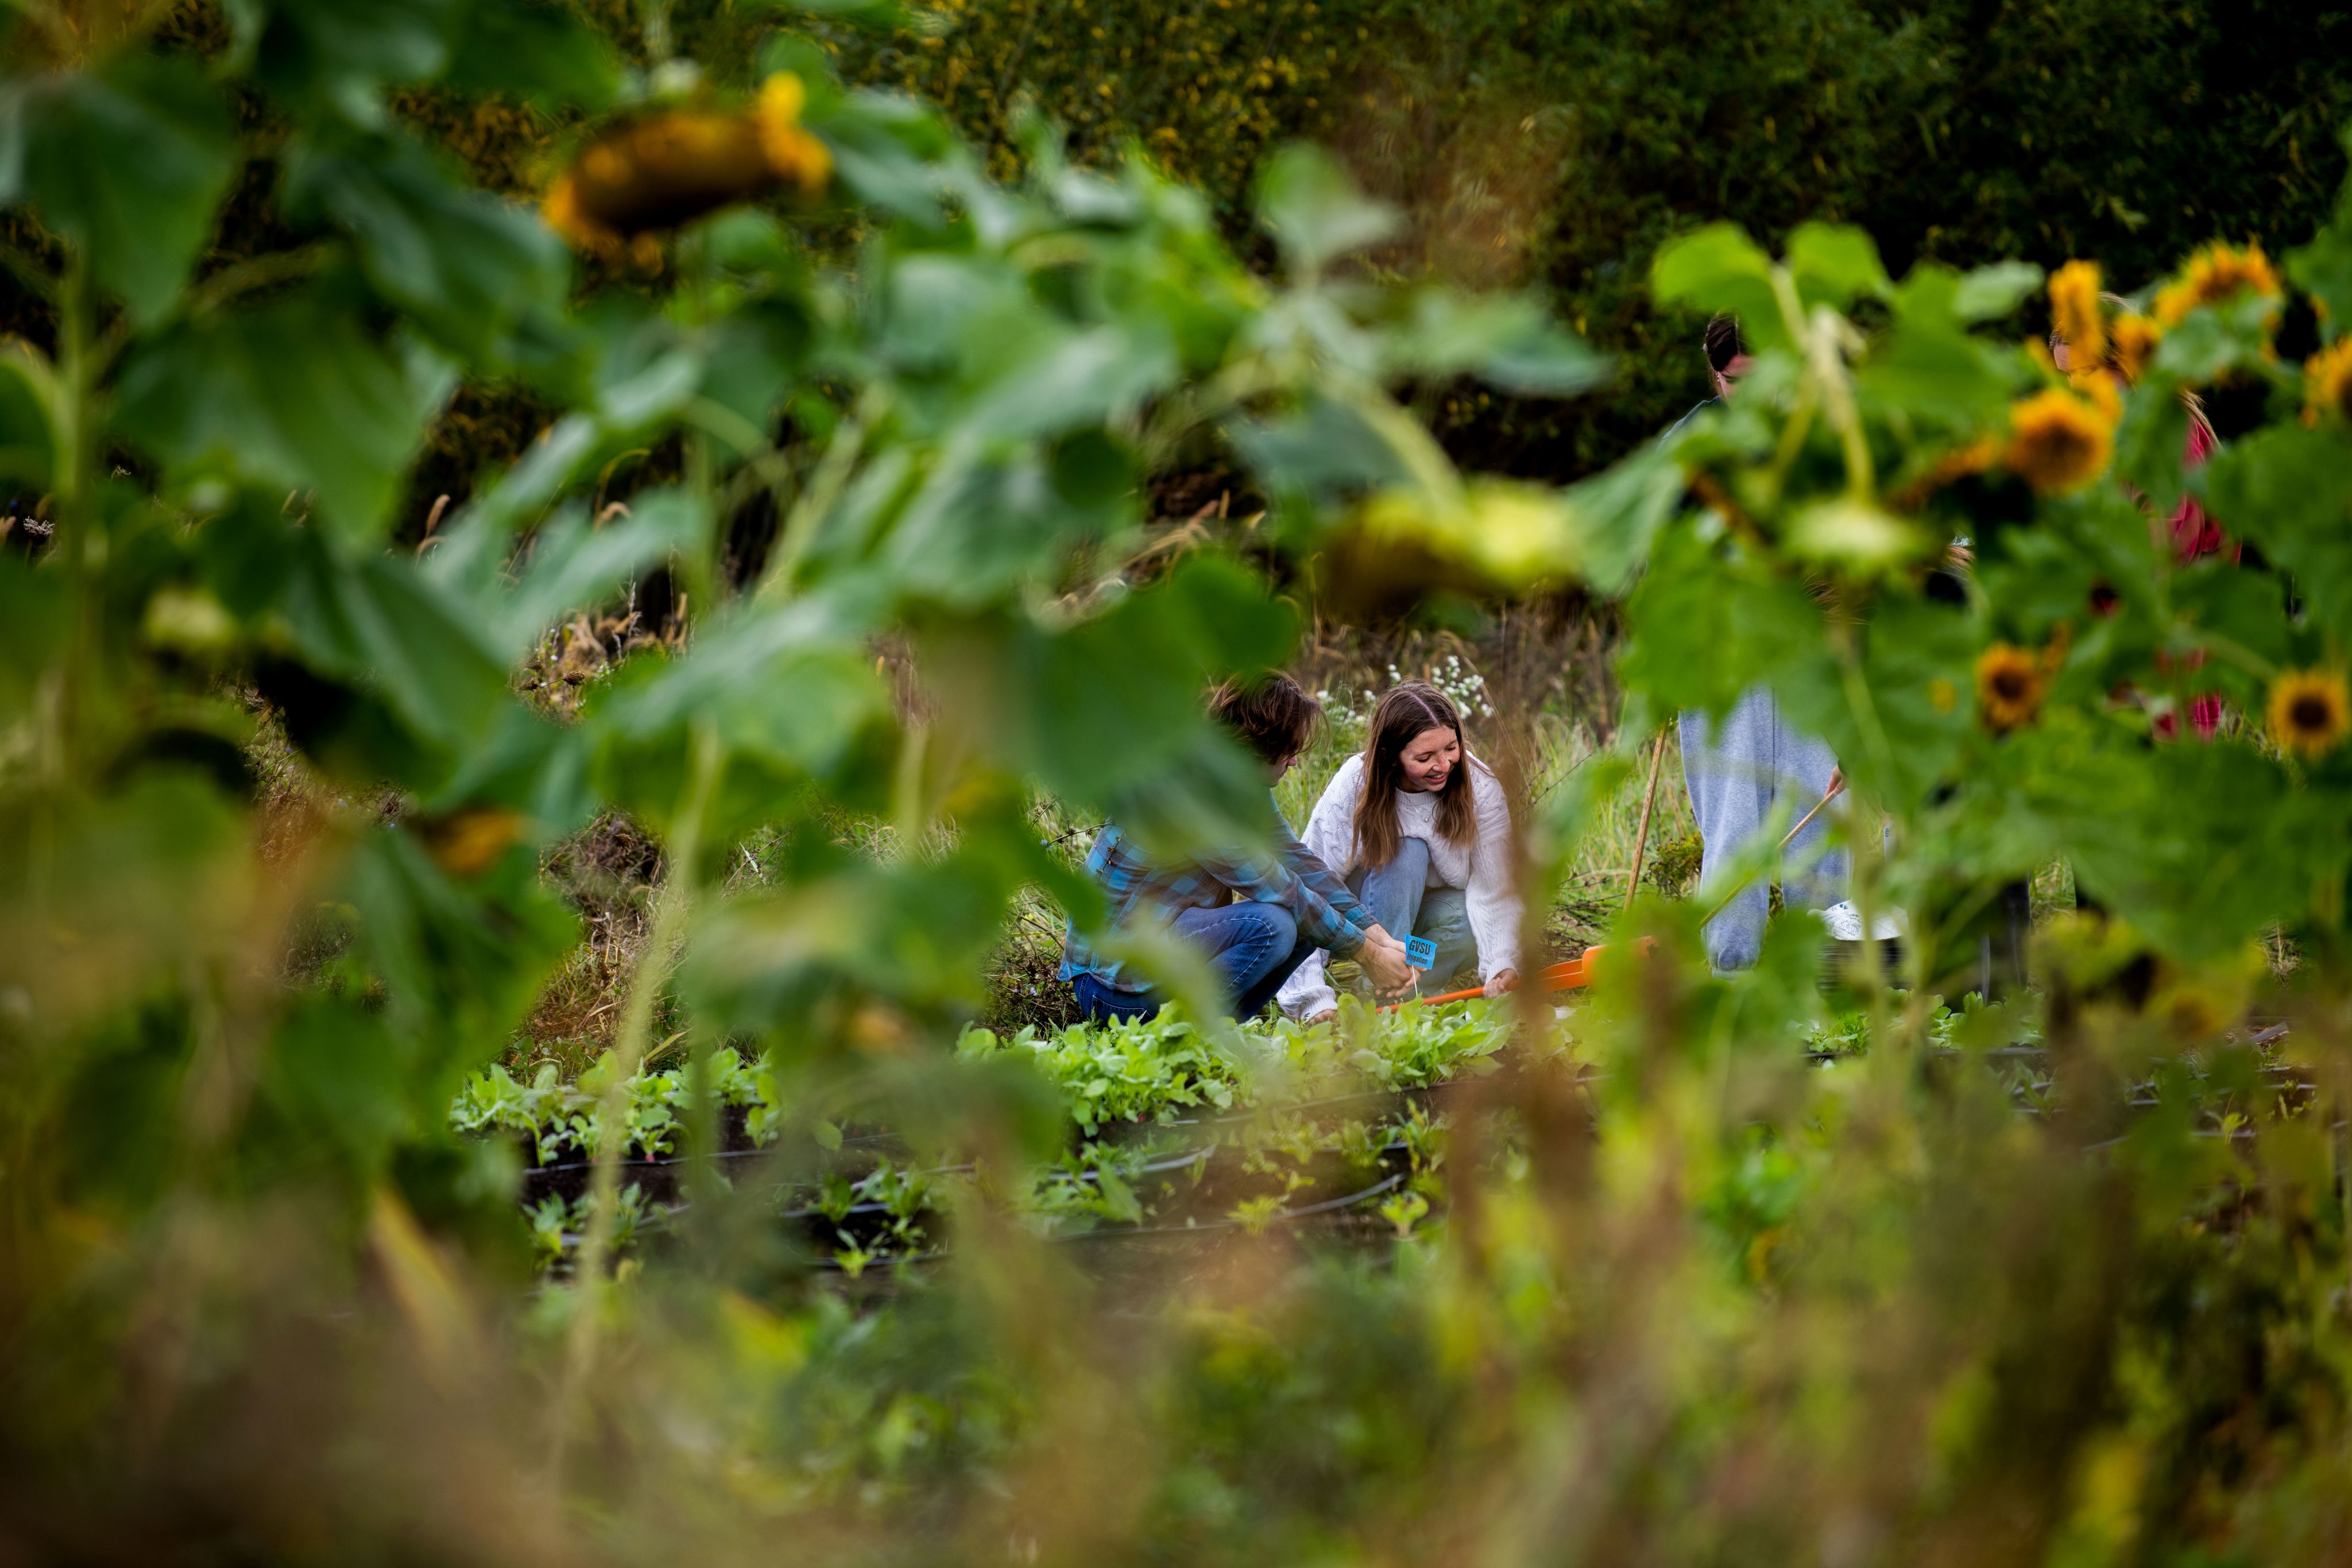 student in garden in focus, sunflowers crowd the forefront